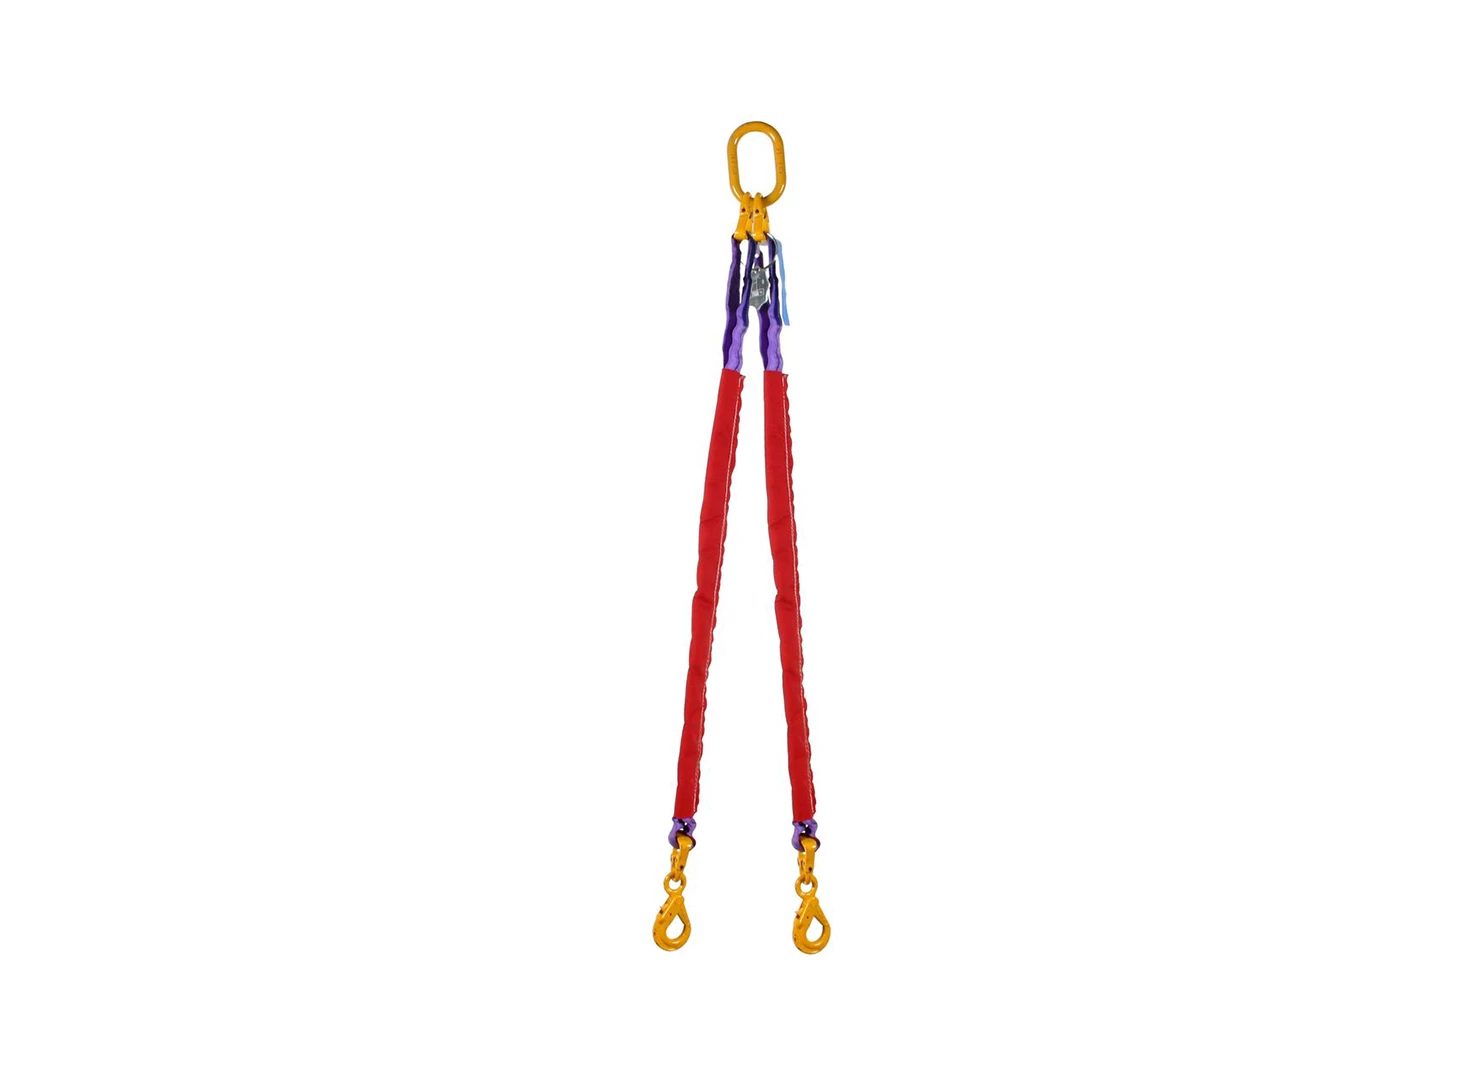 Product: Round slings 4 6.3t*2,3m